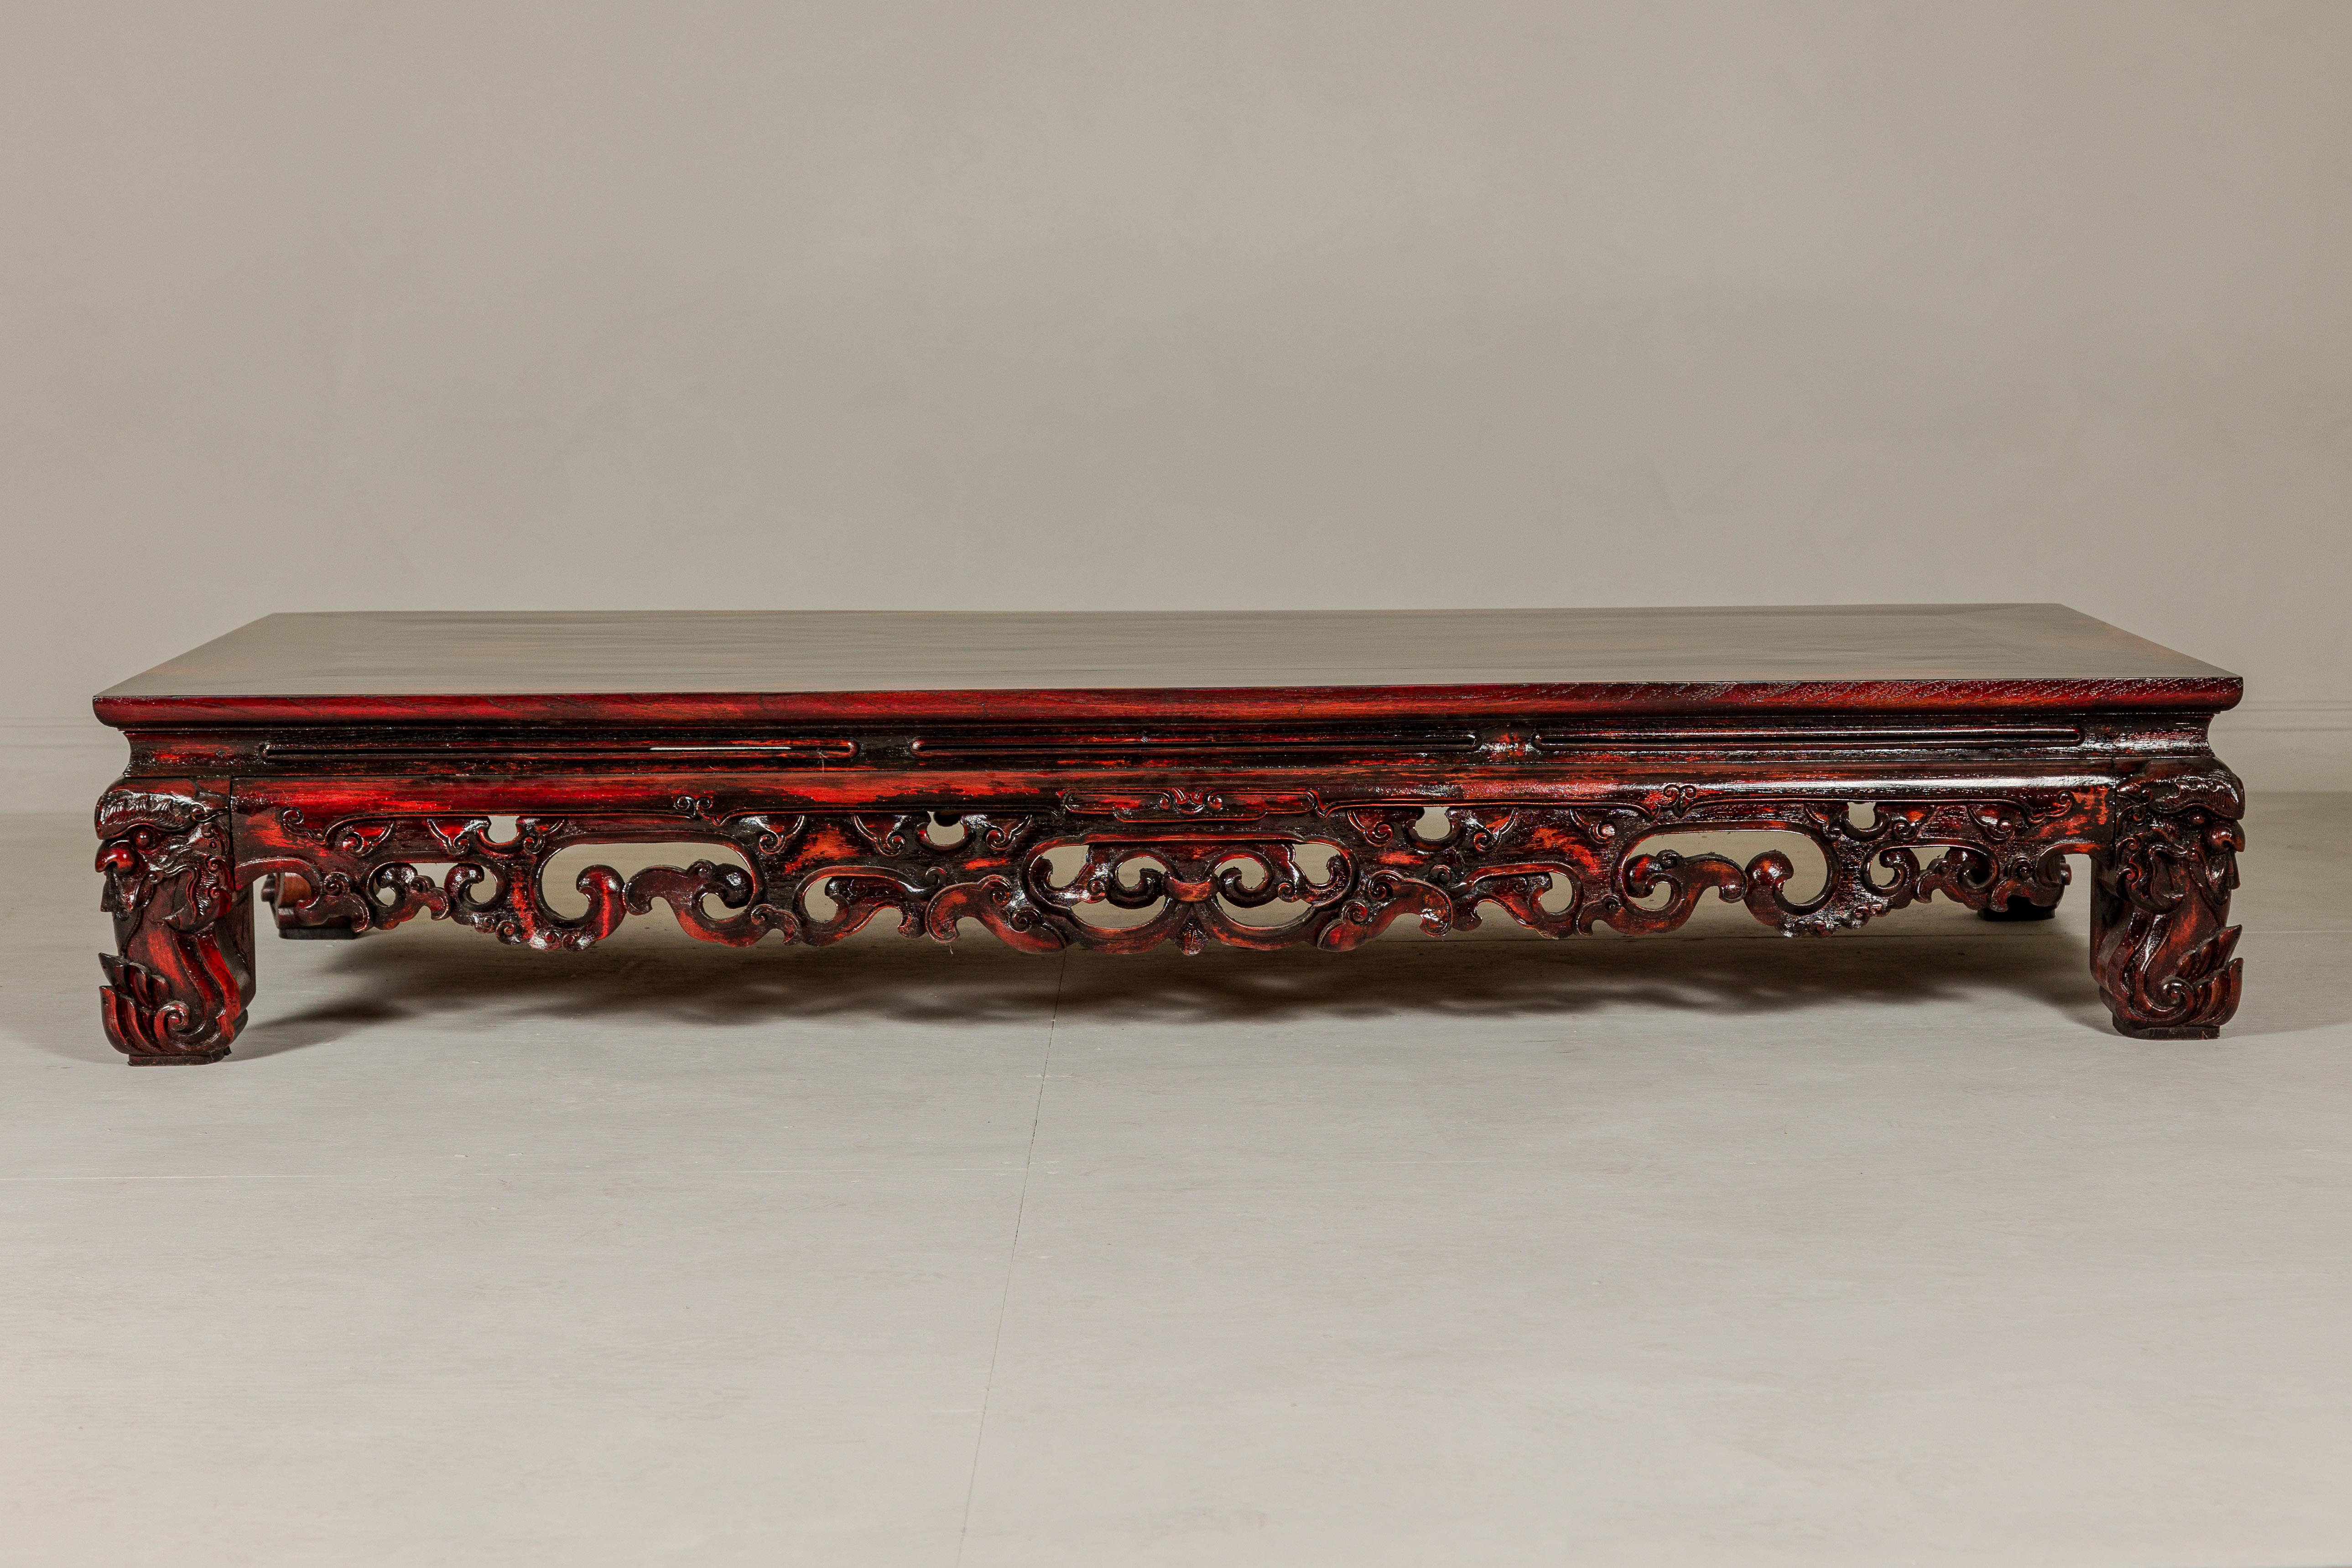 A Chinese Qing Dynasty long low Kang table from the 19th century with reddish brown lacquer and carved mythical motifs. This Chinese Qing Dynasty Kang table from the 19th century is a testament to the timeless allure of traditional craftsmanship.